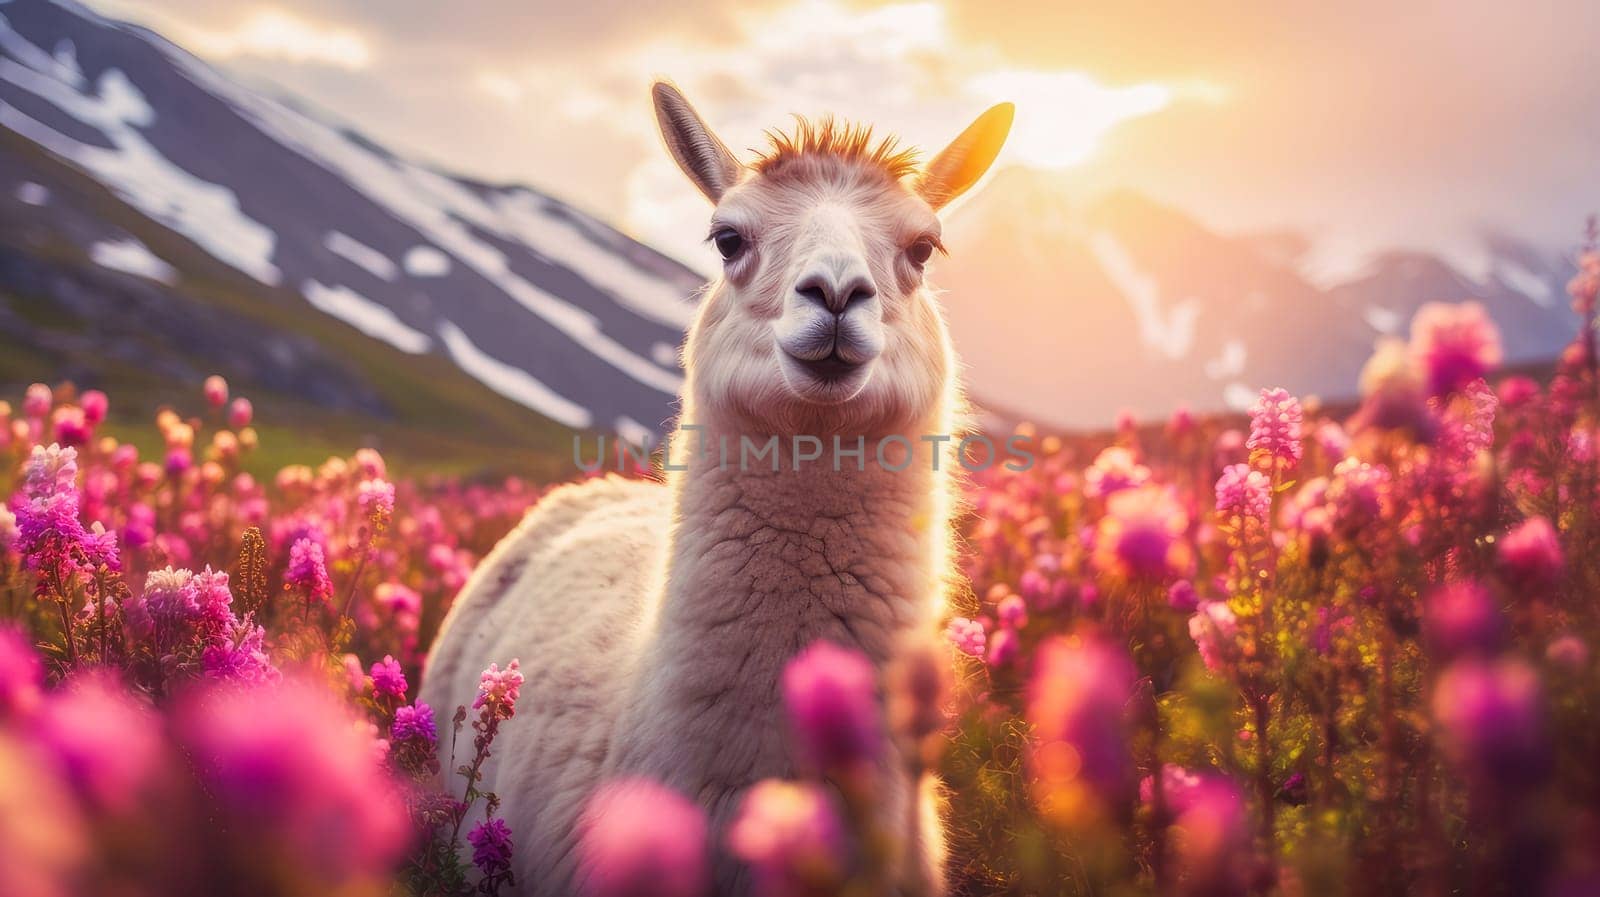 Cute, beautiful llama in a field with flowers in nature, in sunny pink rays. Environmental protection, the problem of ocean and nature pollution. Advertising travel agency, pet store, veterinary clinic, phone screensaver, beautiful pictures, puzzles